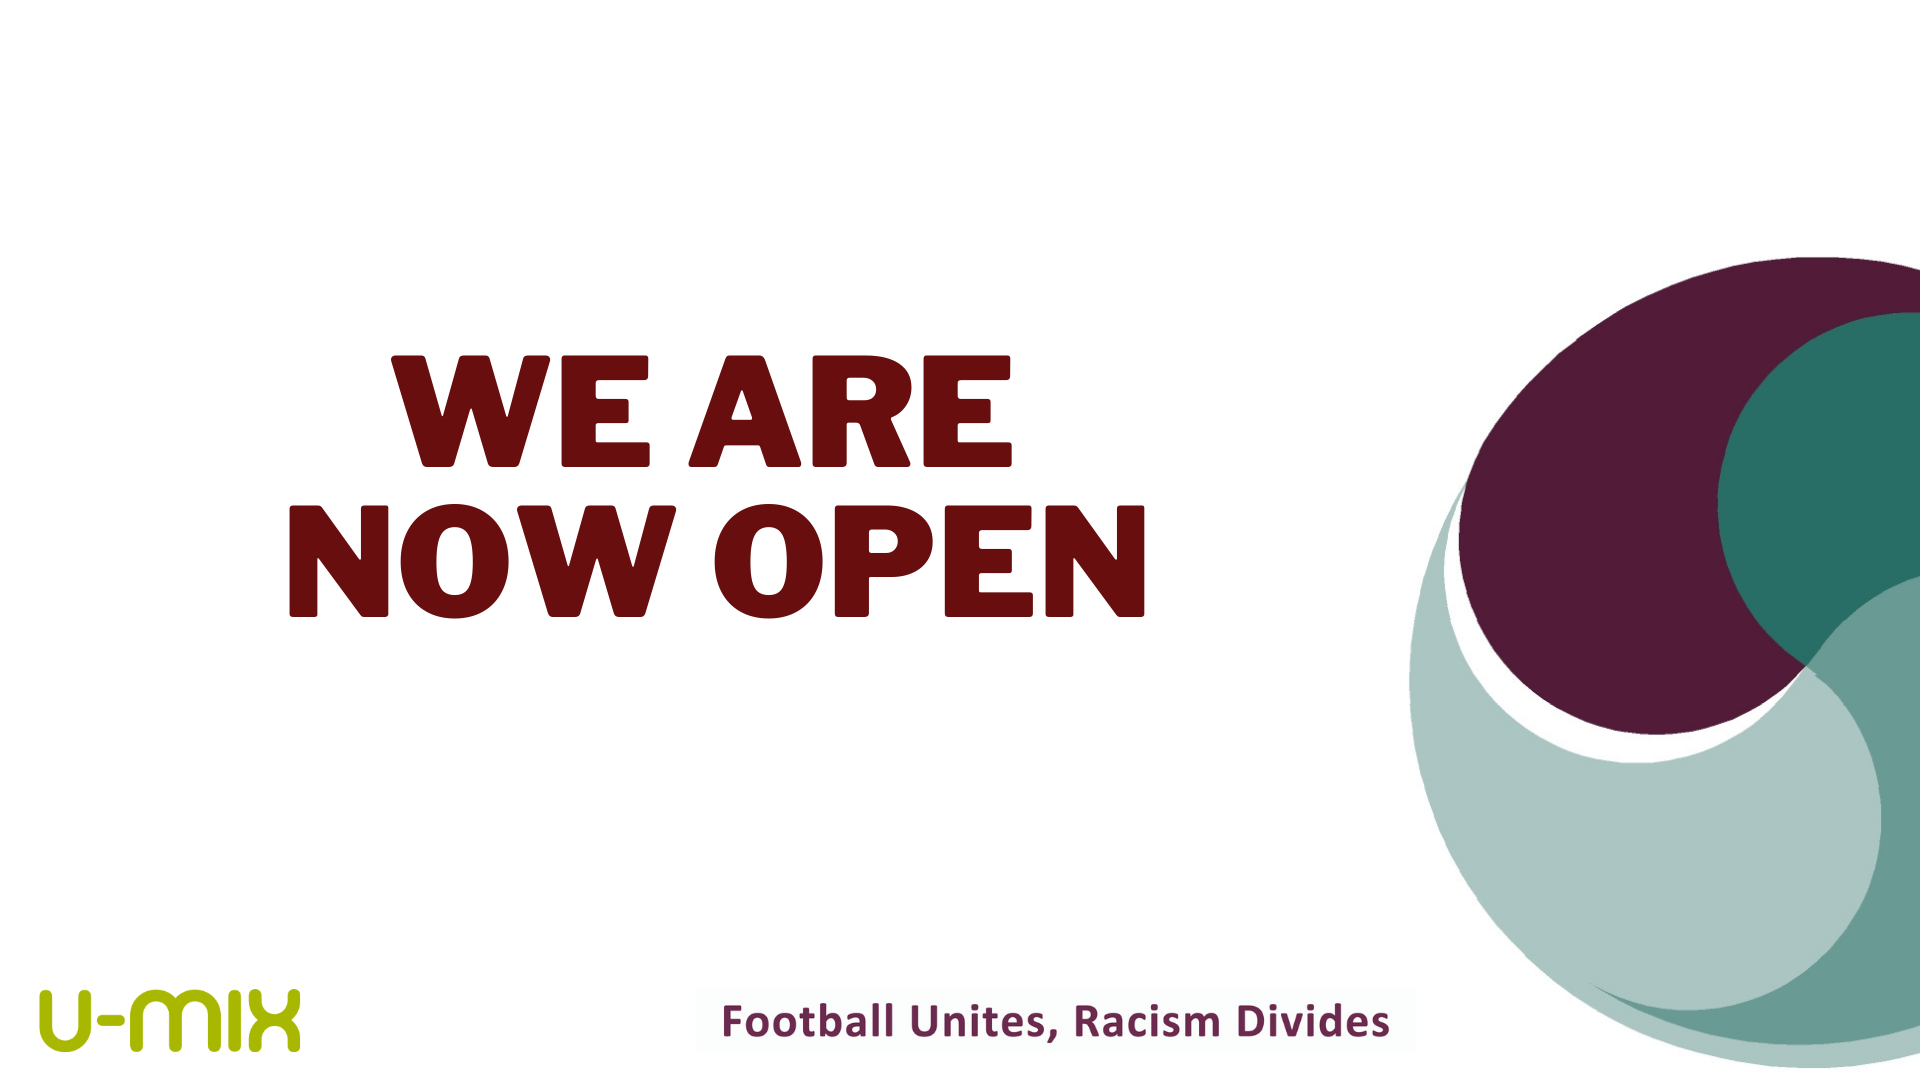 We are now open